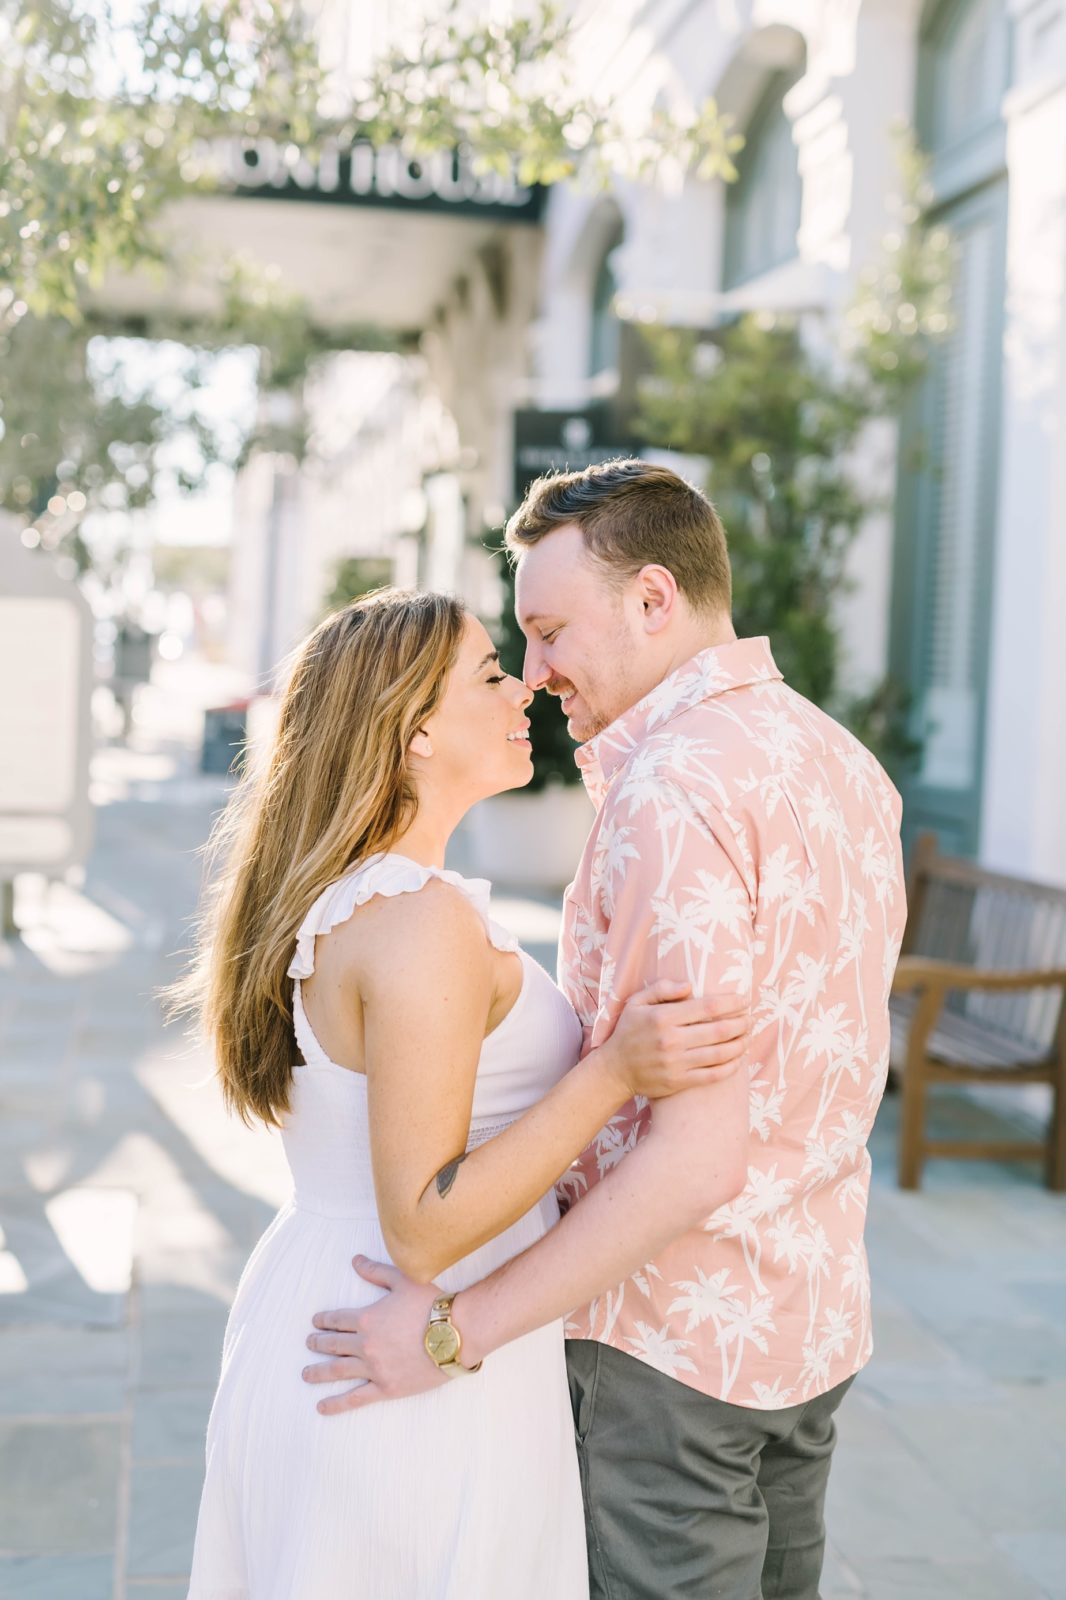 Portraits outside The Tremont House in Texas captured by Christina Elliott Photography. engaged couple kiss on the street #ChristinaElliottPhotography #ChristinaElliottEngagements #TheTremontHouse #Texasengagements #shesaidyes